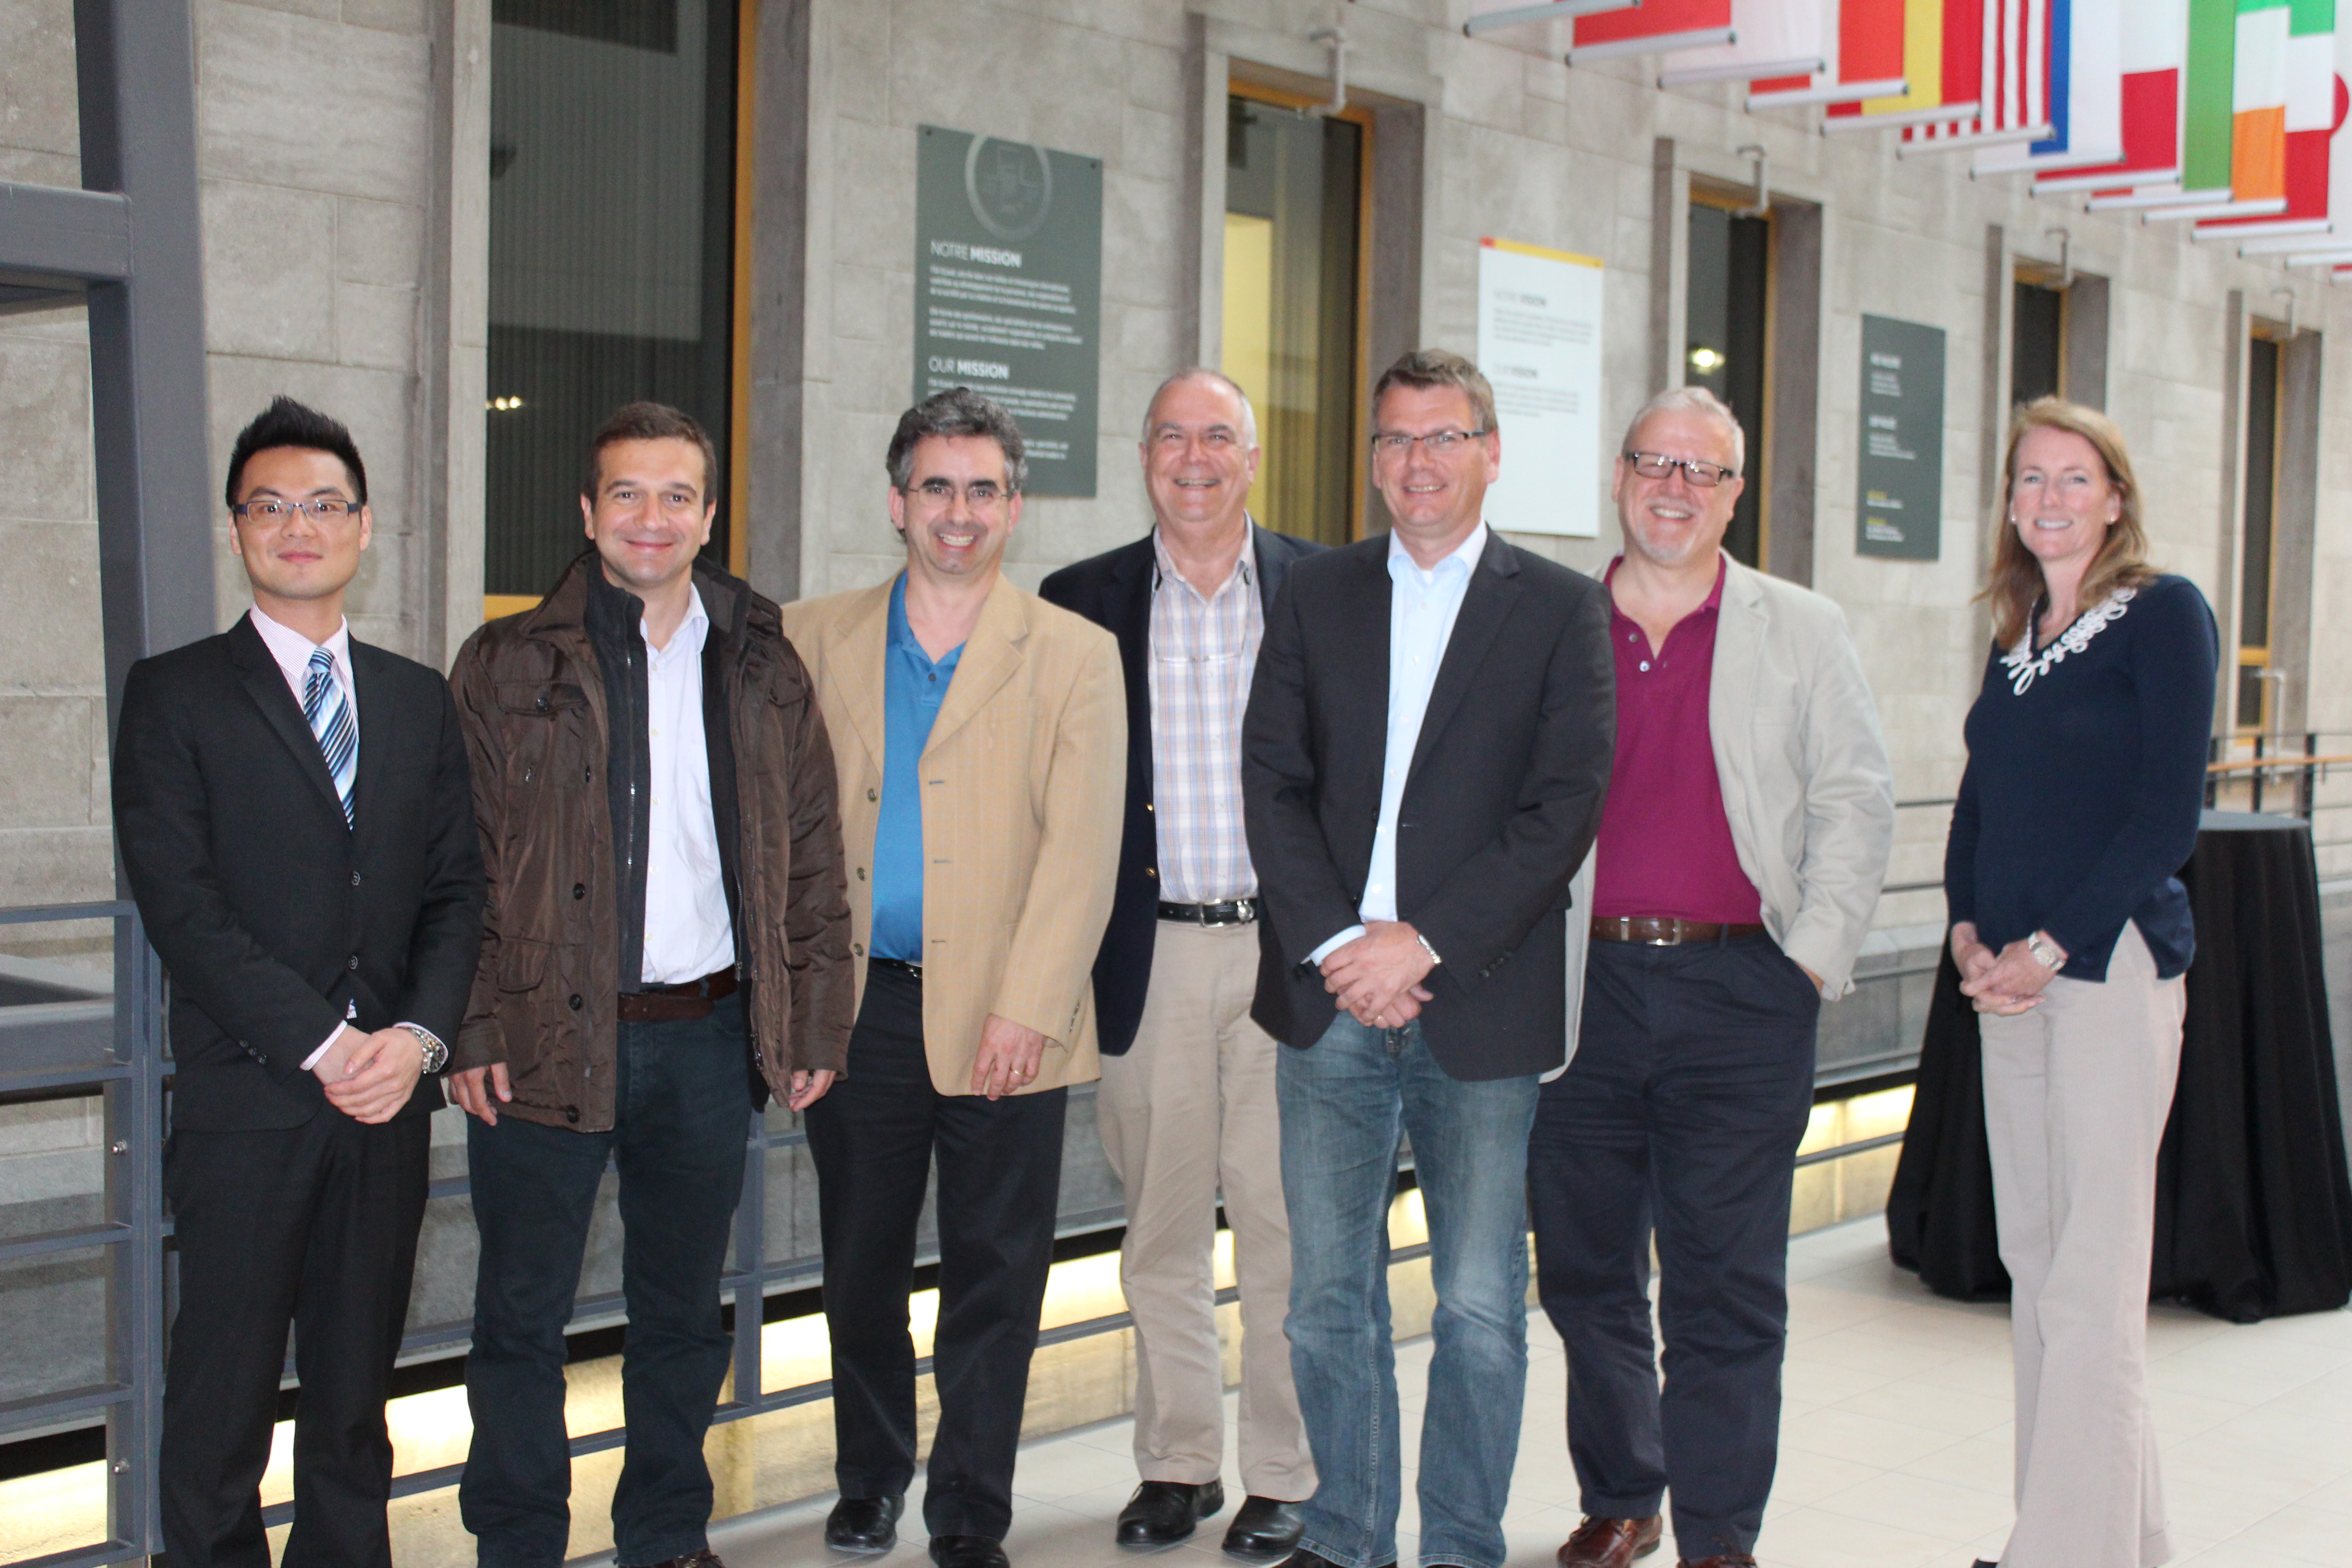 Dr Zhong (left) with other delegates at the International Physical Internet Conference